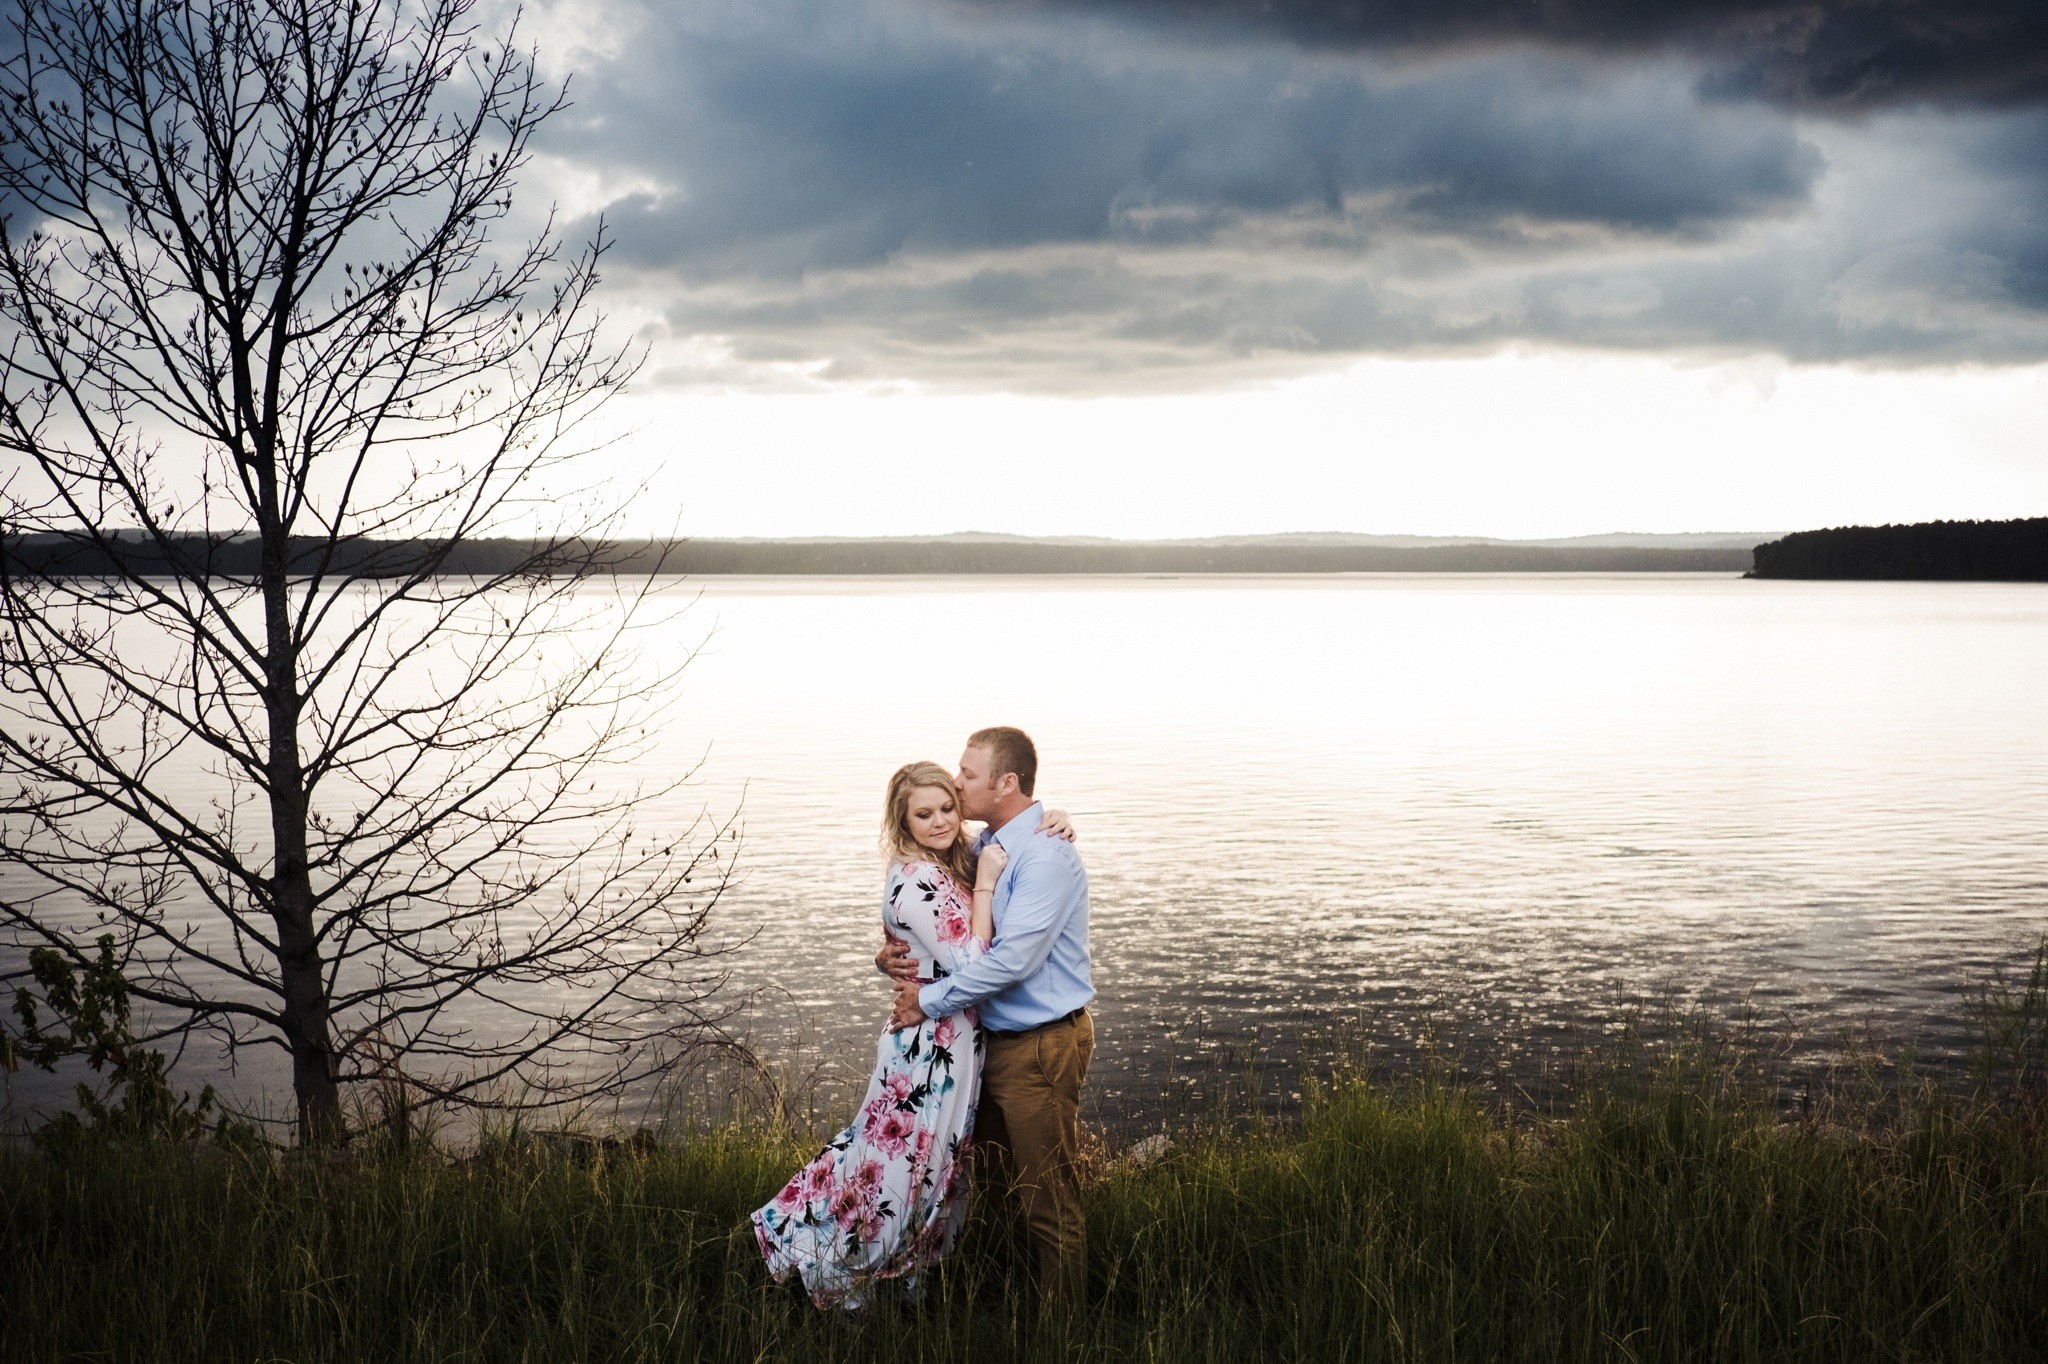 the sweet embrace from this couple on a cloudy day with a lake view during their Downtown Apex Engagement Session